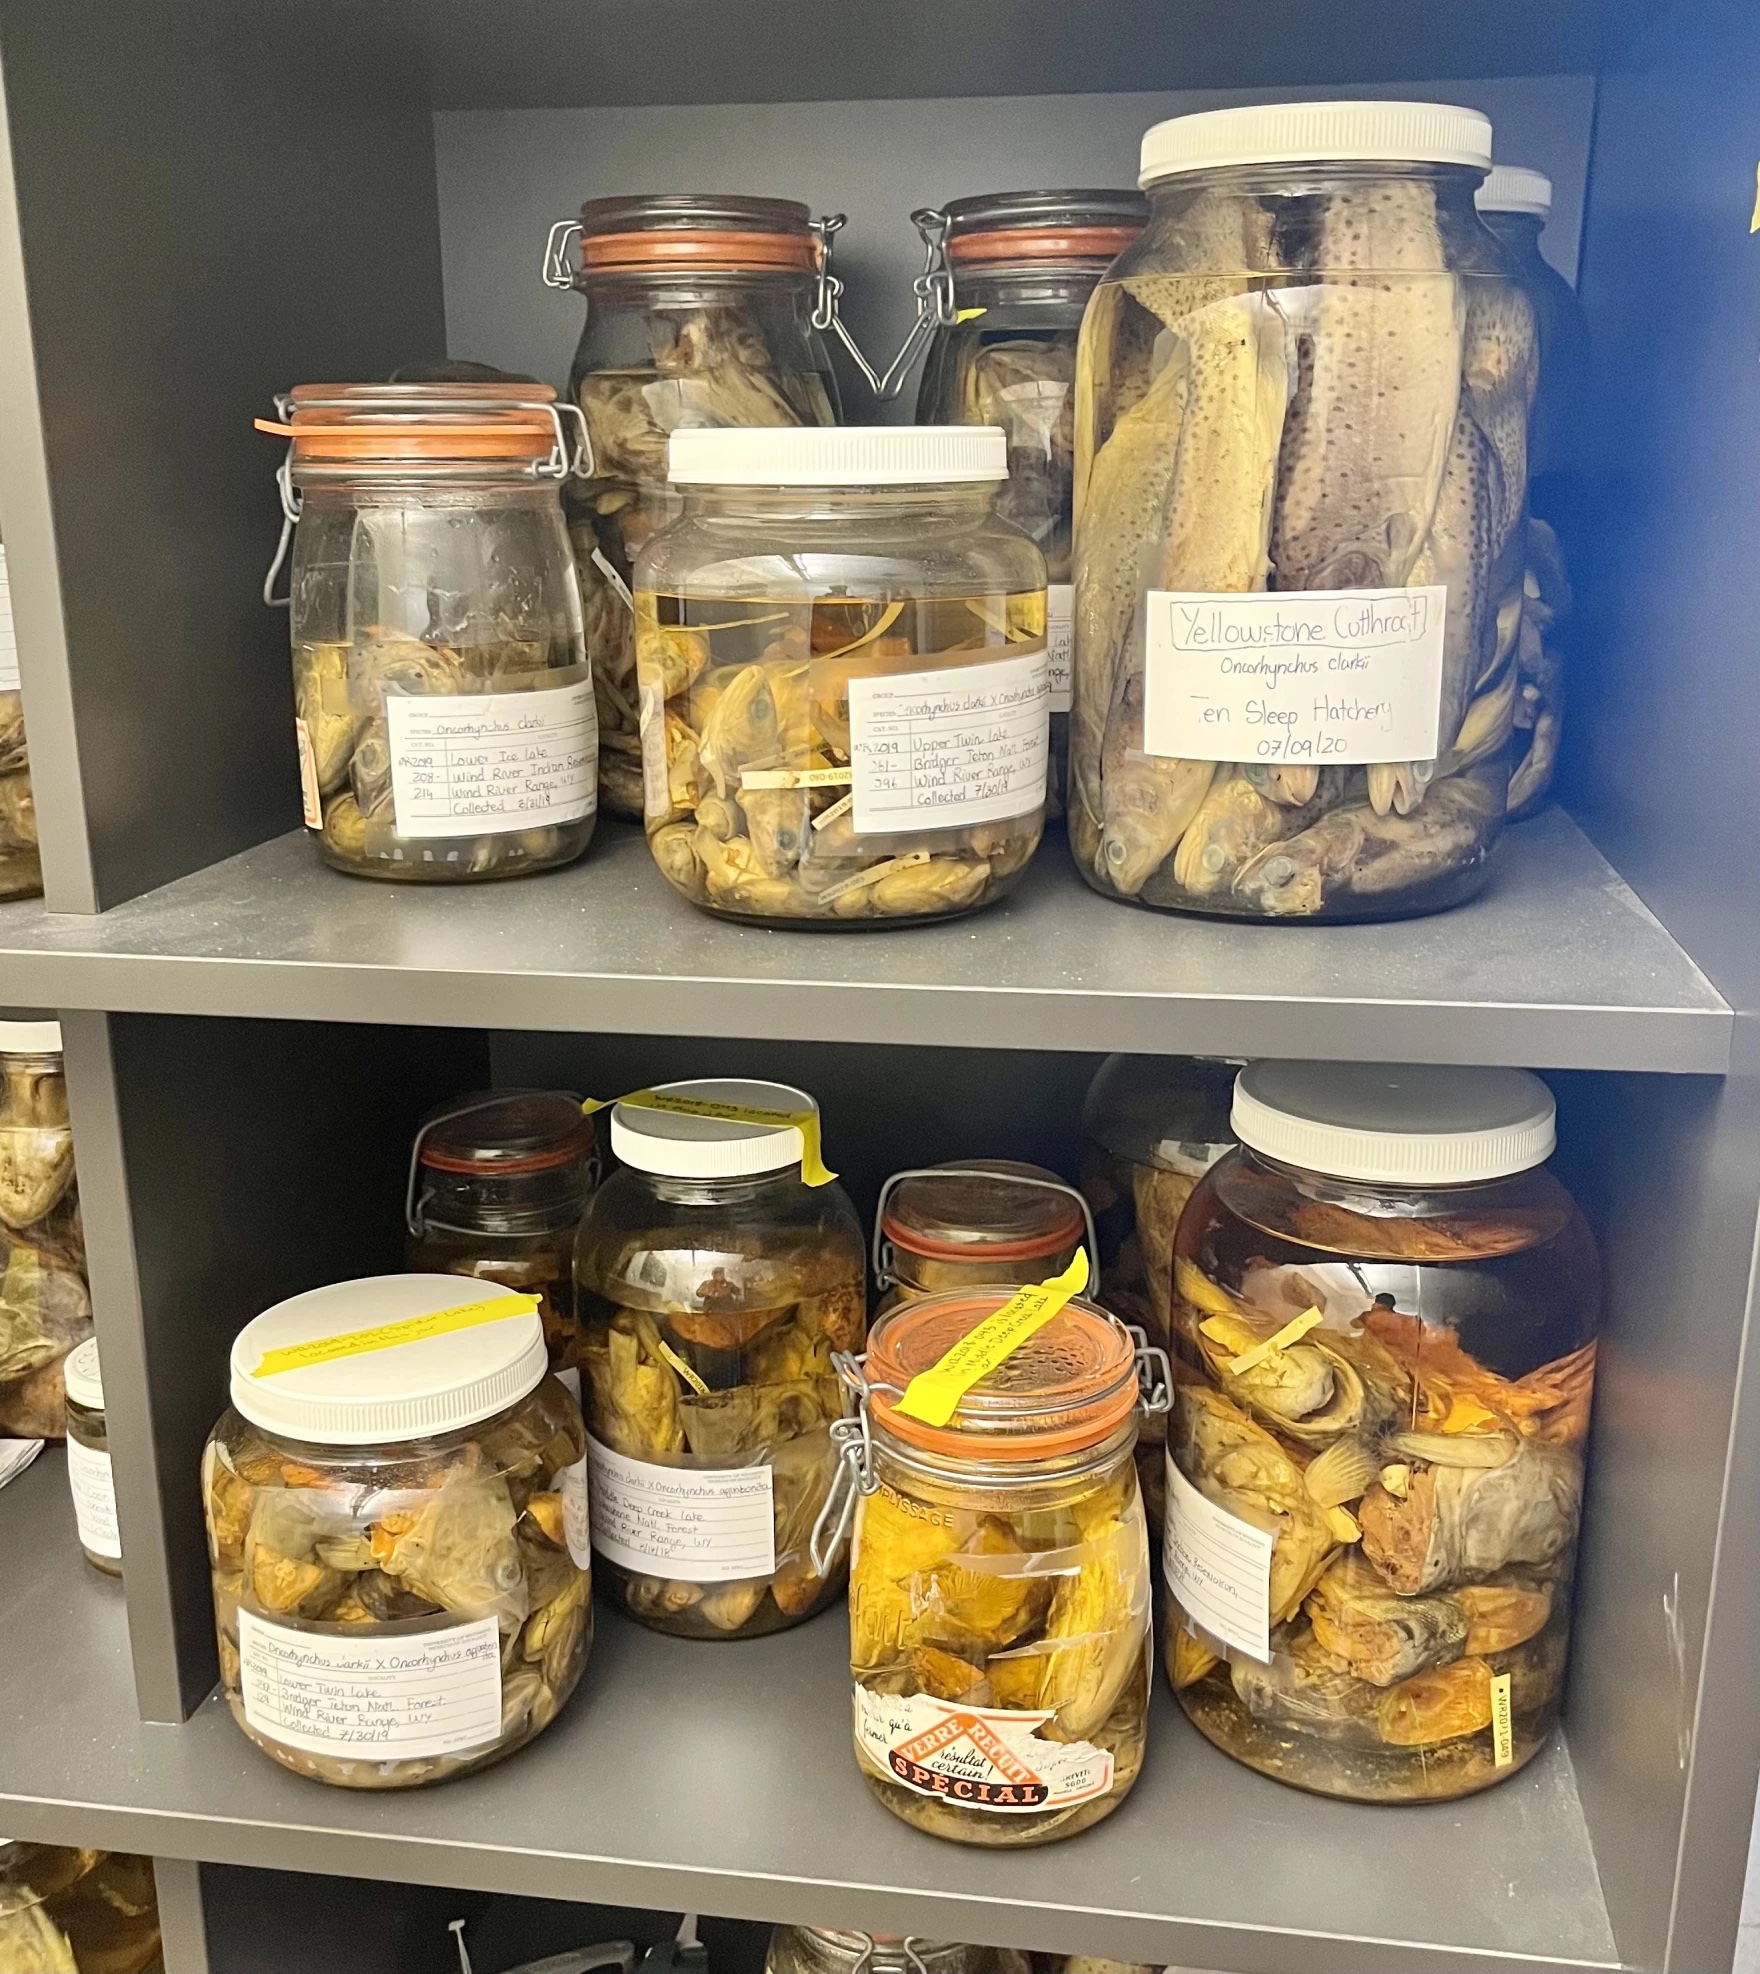 Jars of discolored, old-looking fish sit on grey shelves.